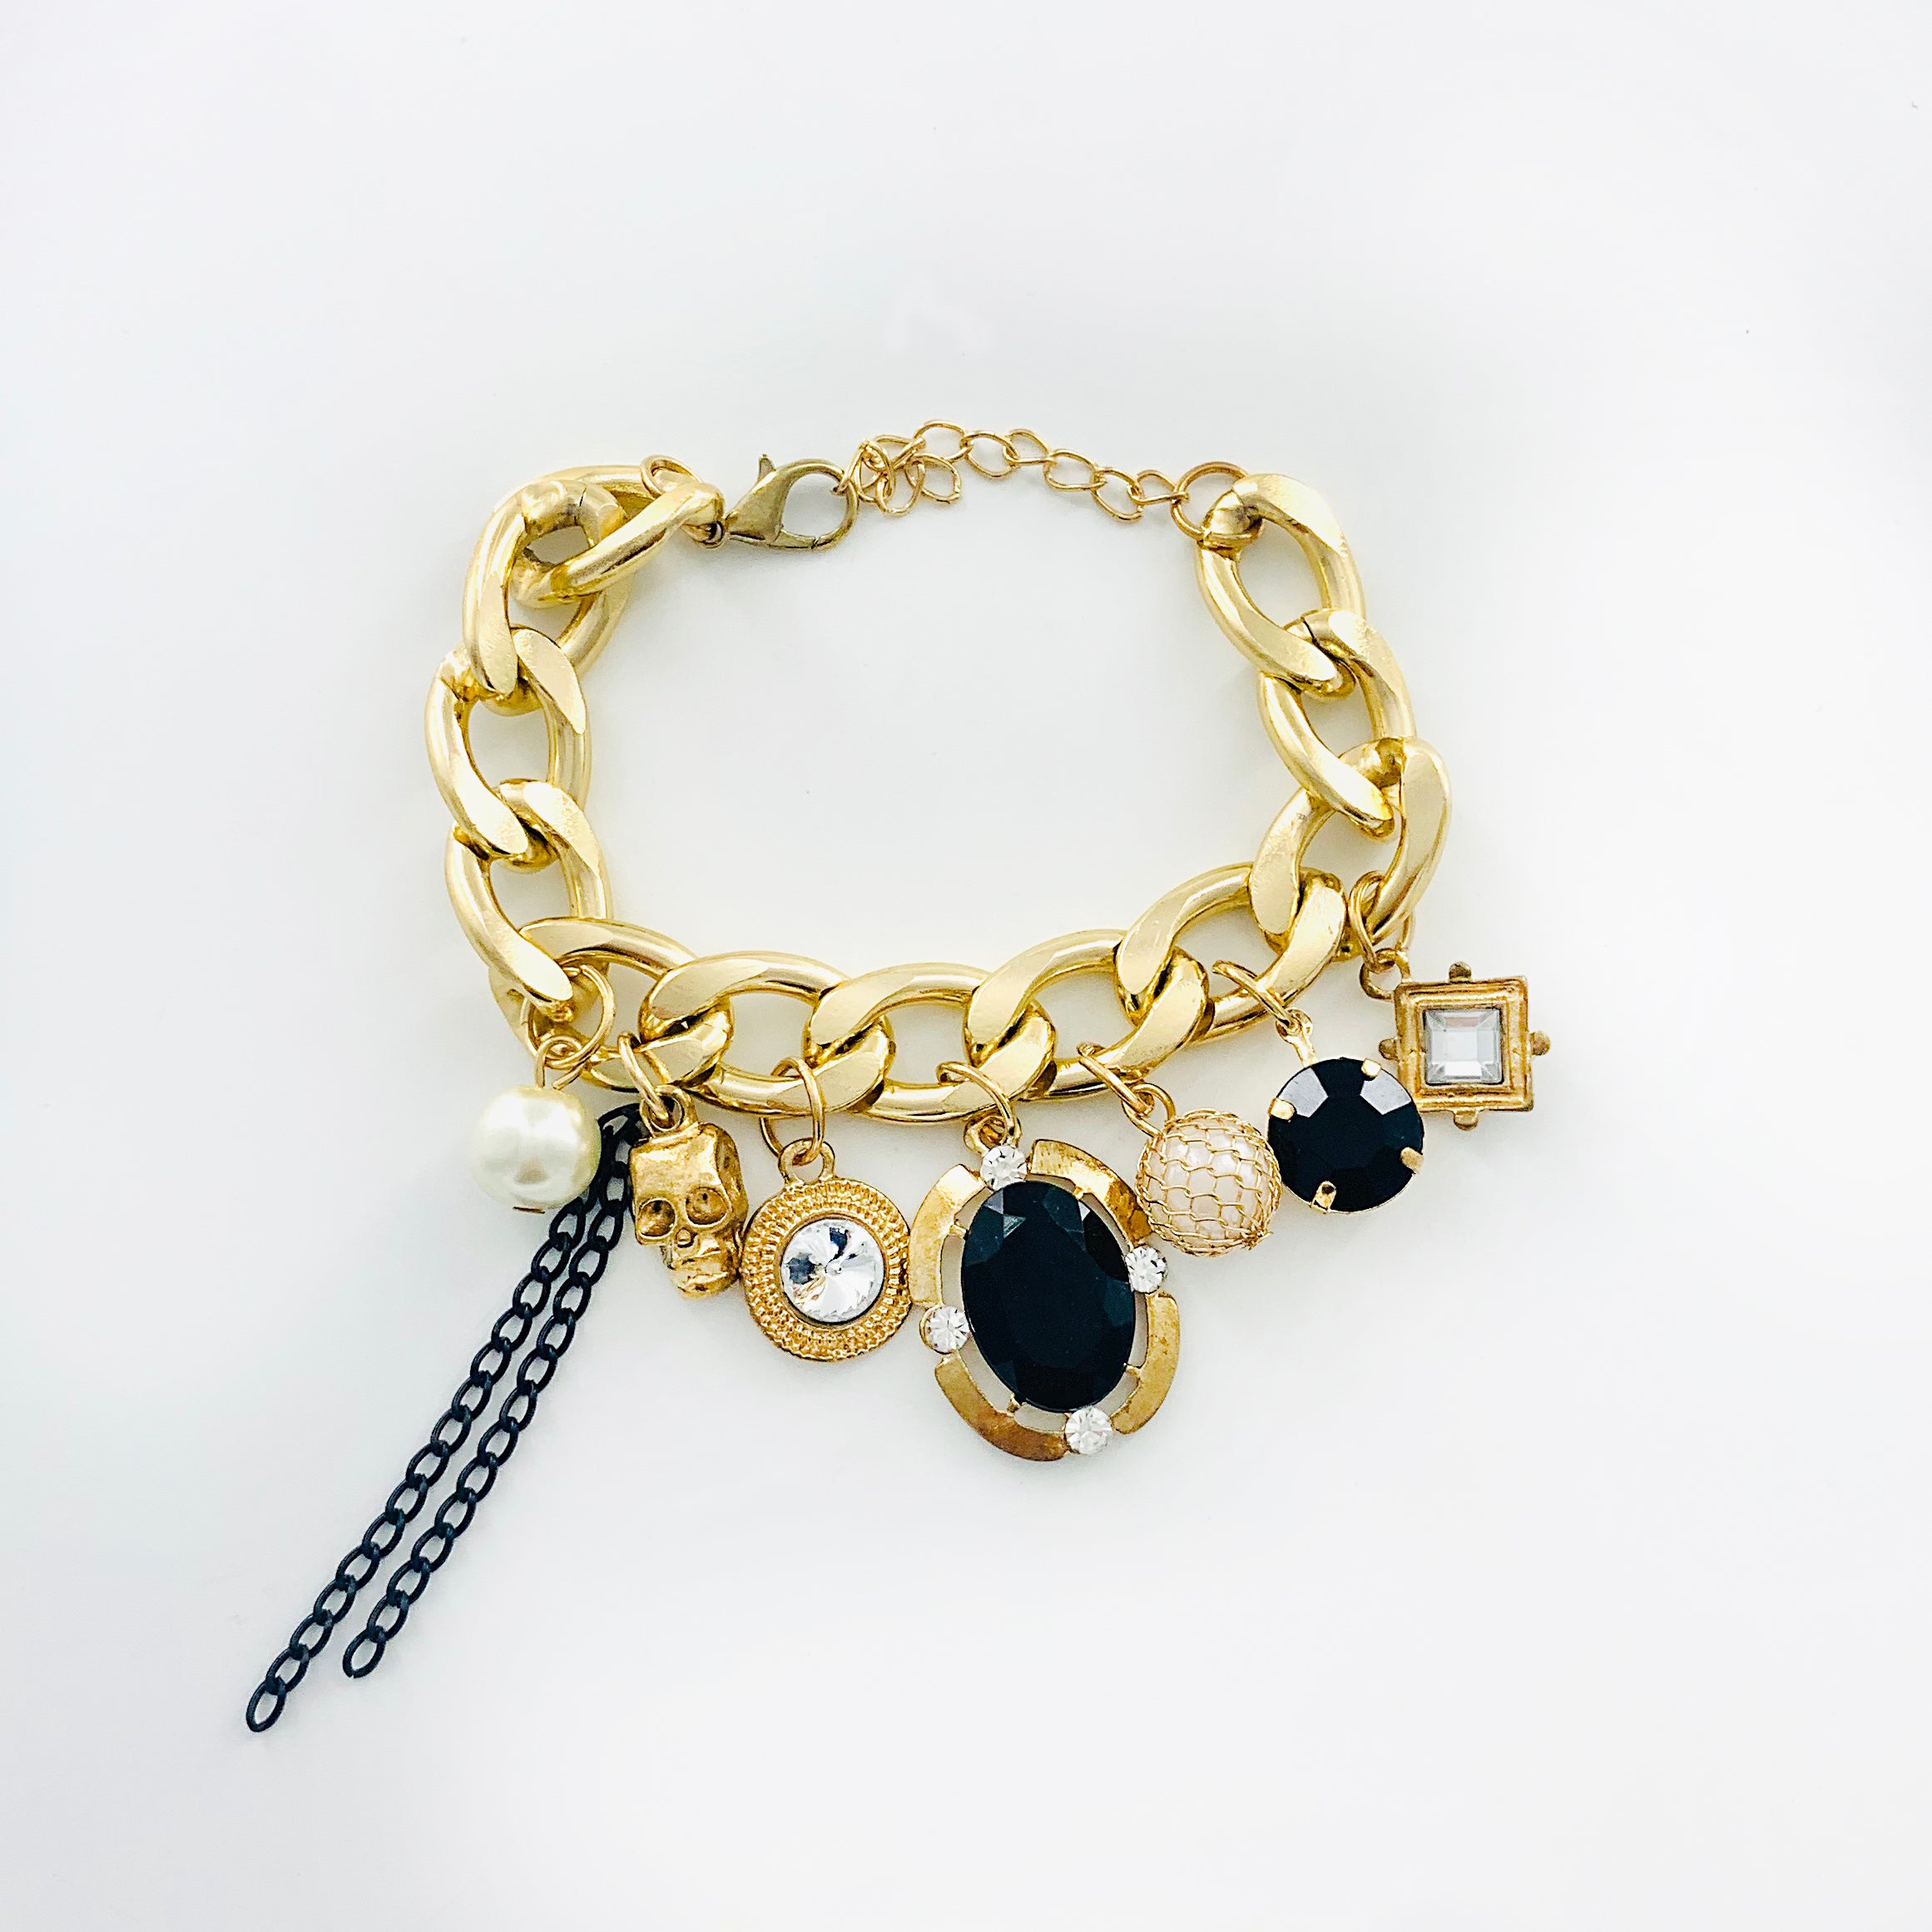 Gold chunky chain with skull and gem charms